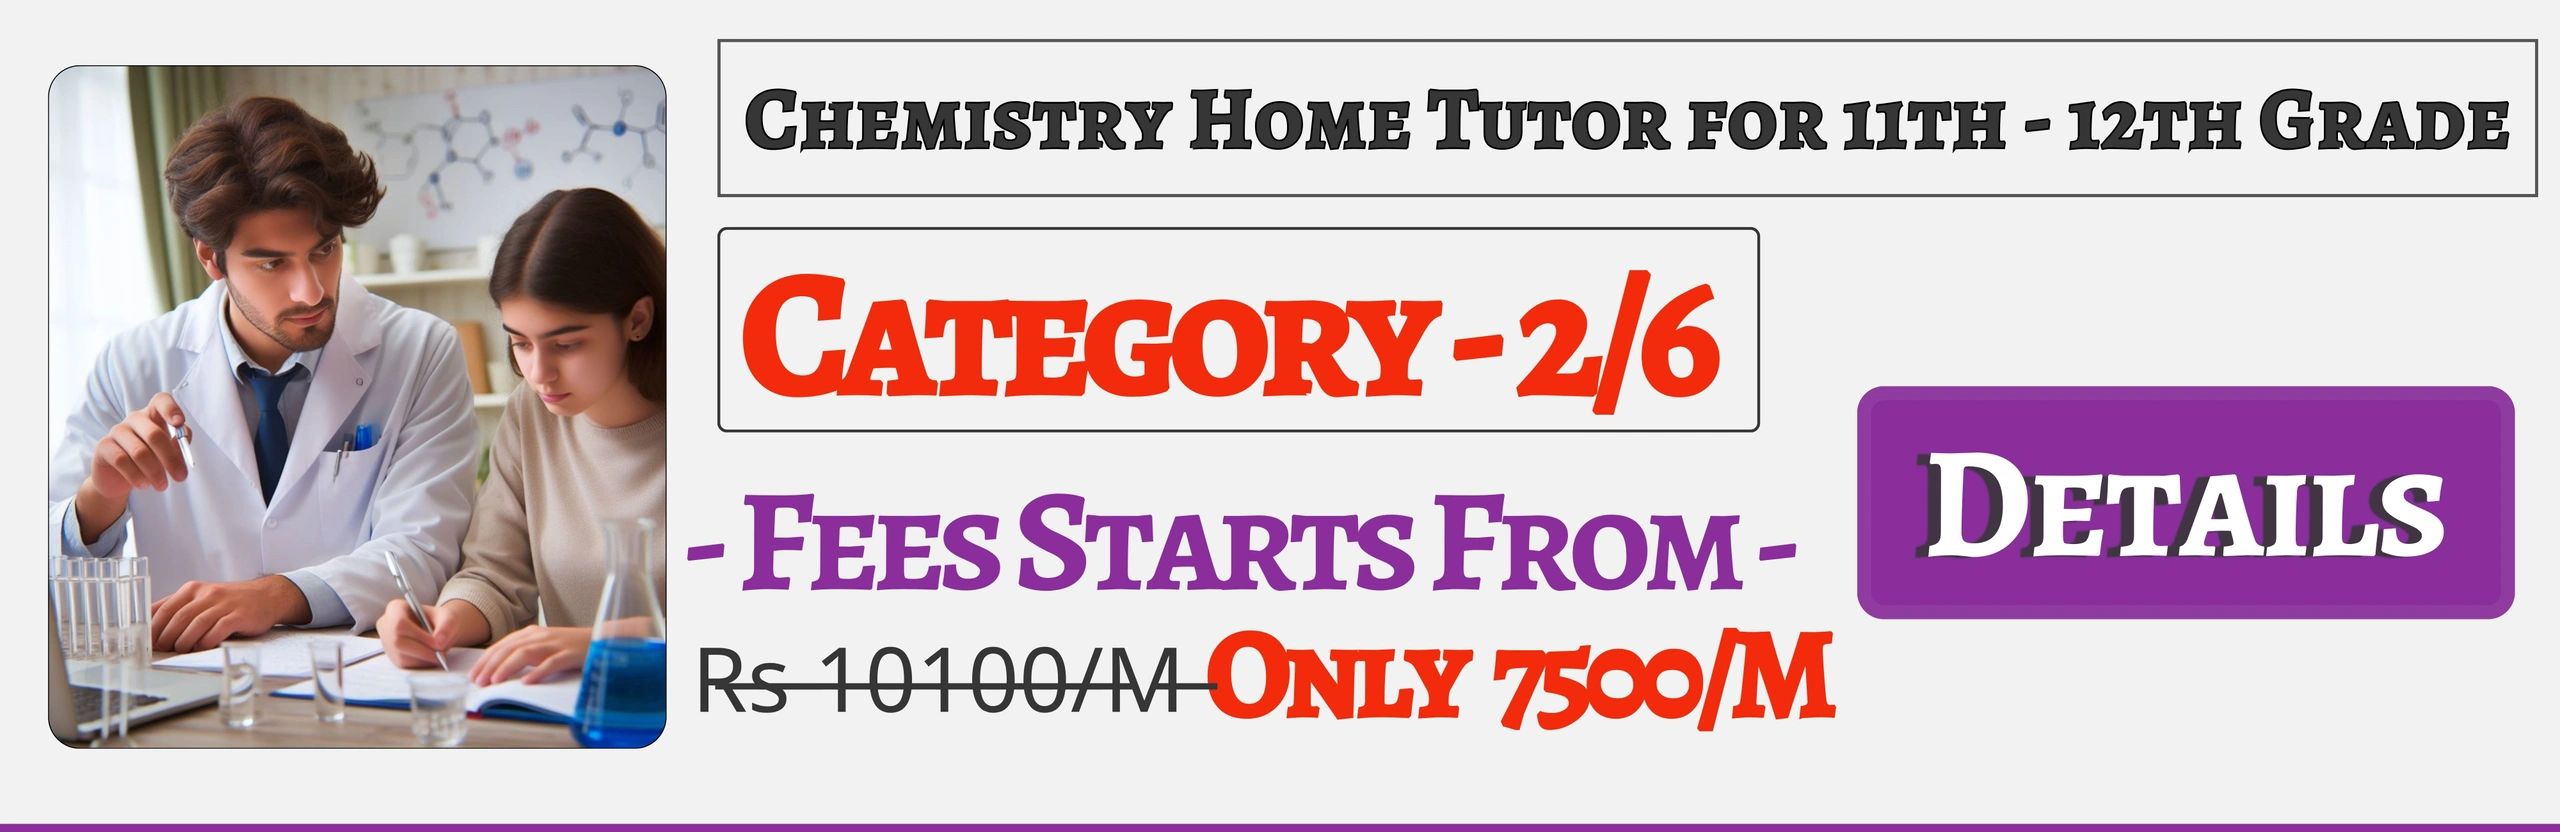 Book Best Nearby Chemistry Home Tuition Tutors For 11th & 12th In Jaipur , Fees Only 7500/M